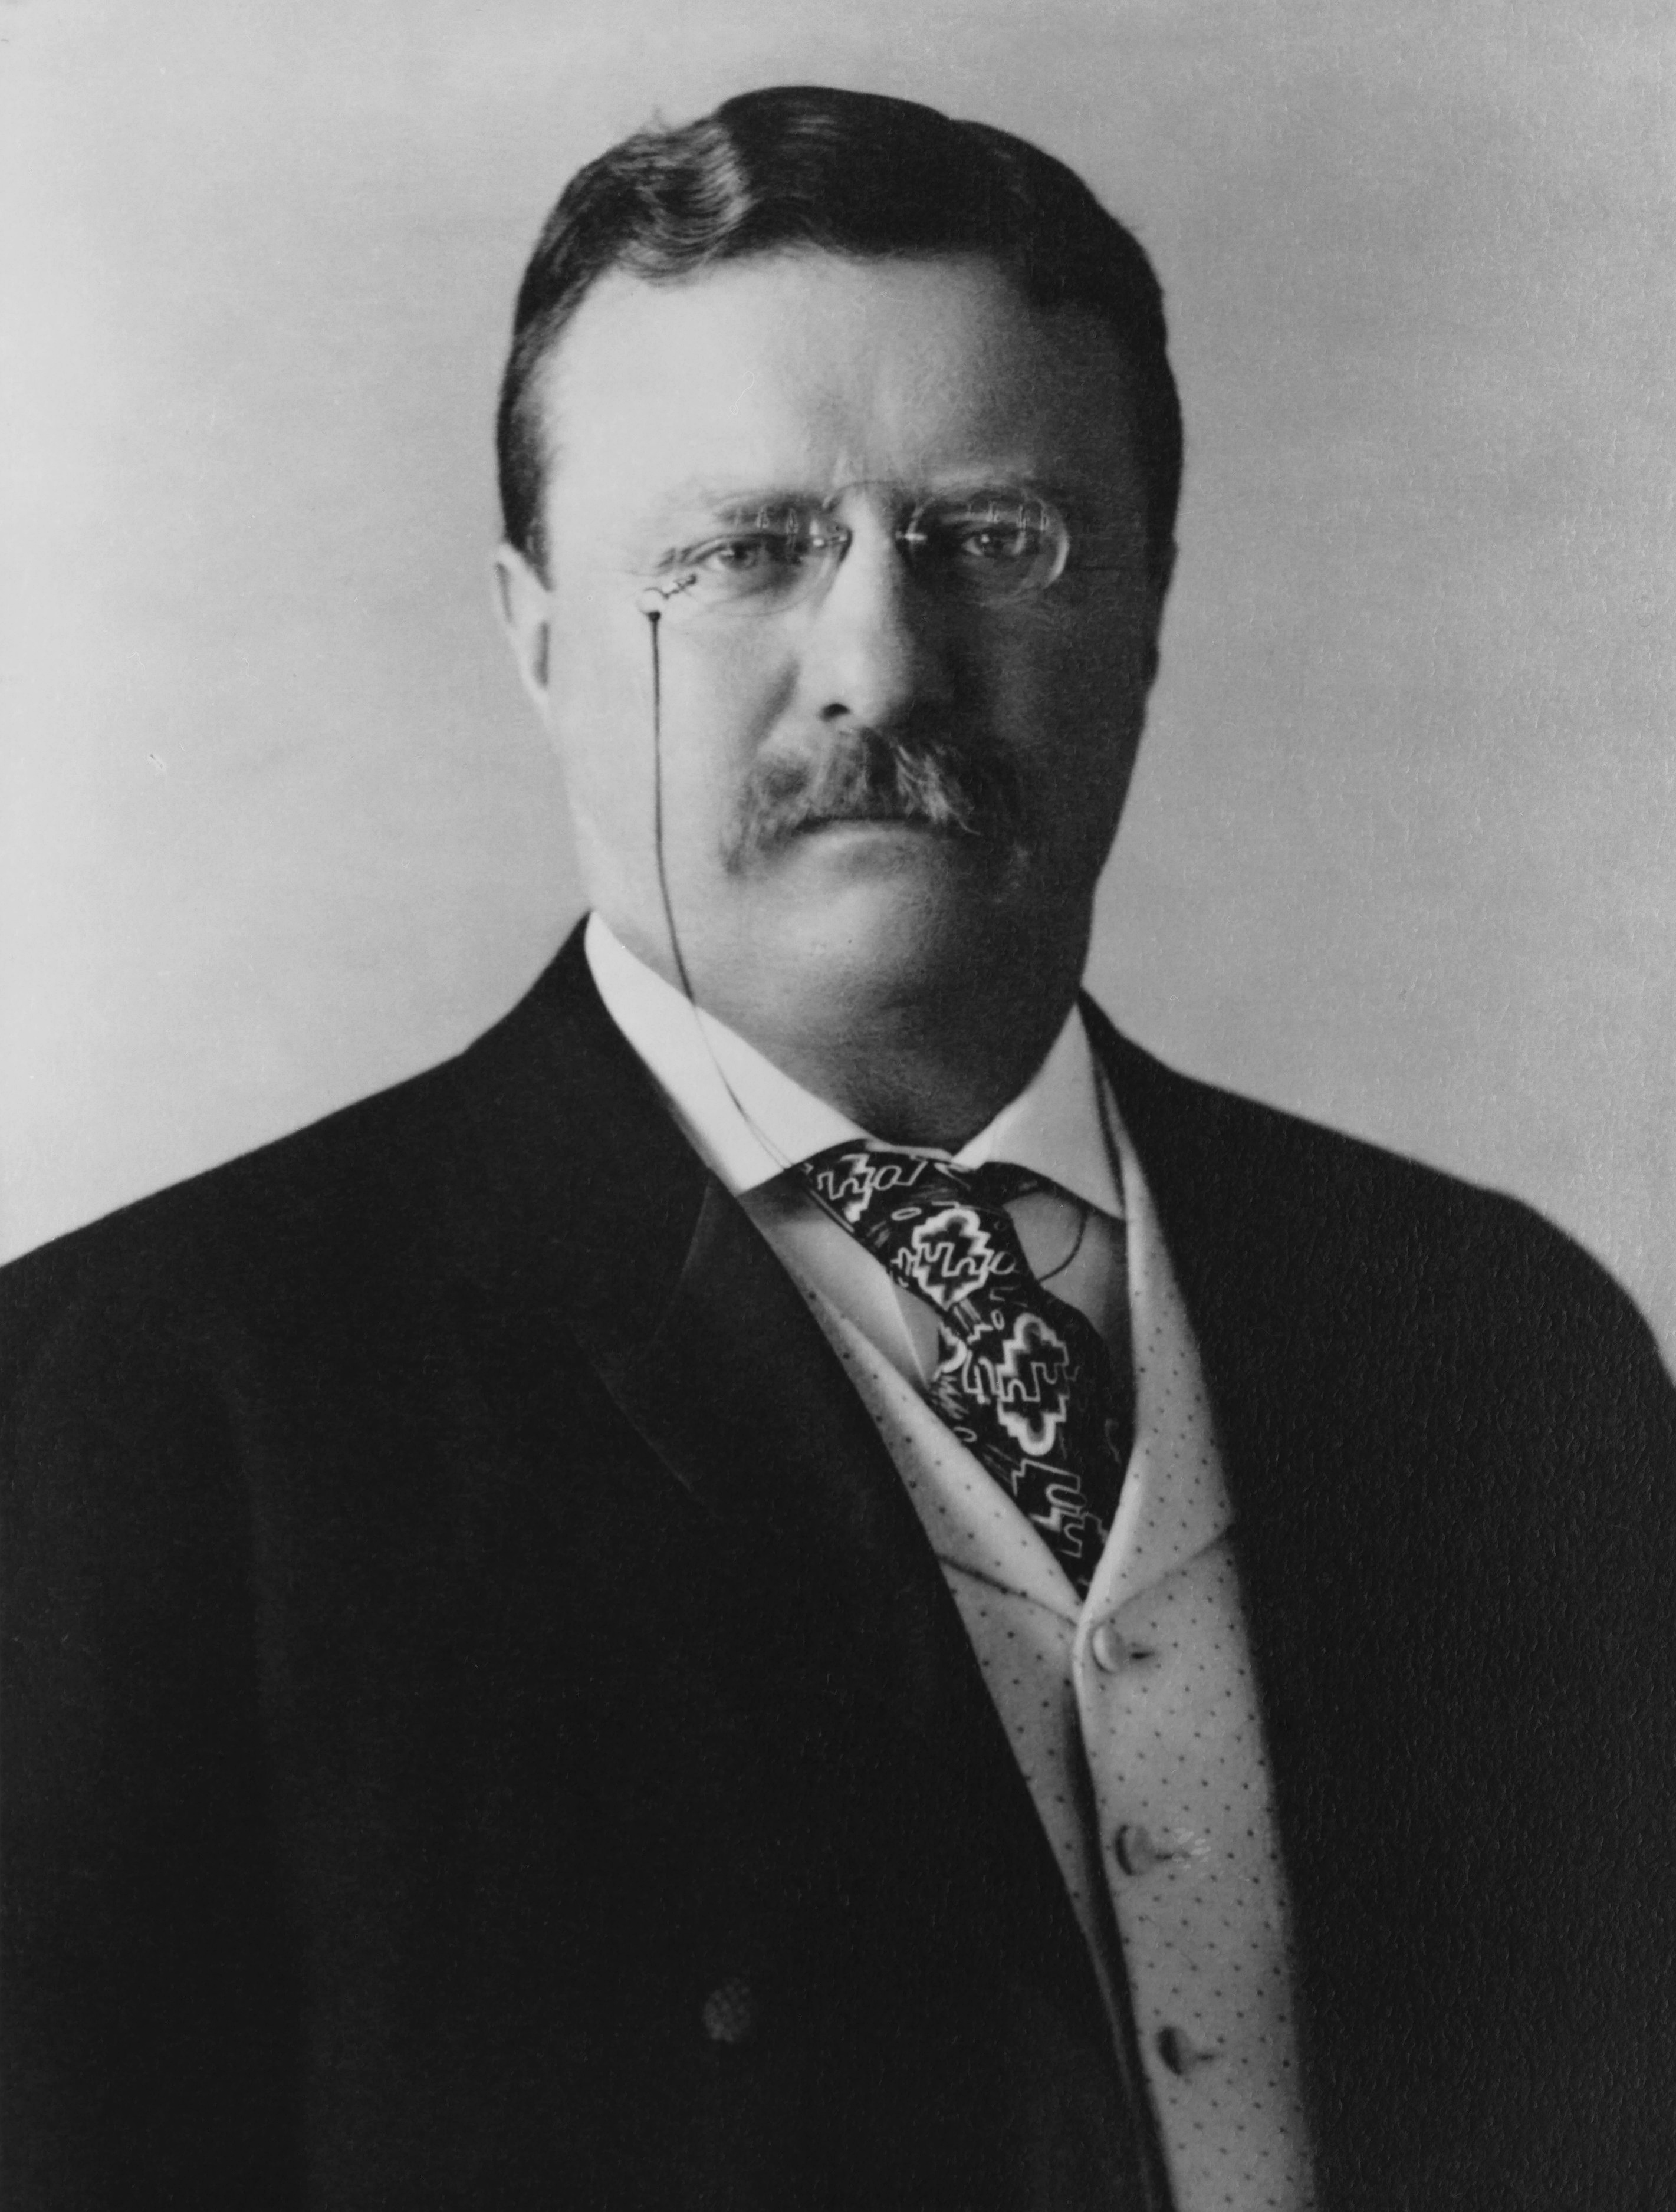 Top 10 Interesting Facts About Teddy Roosevelt